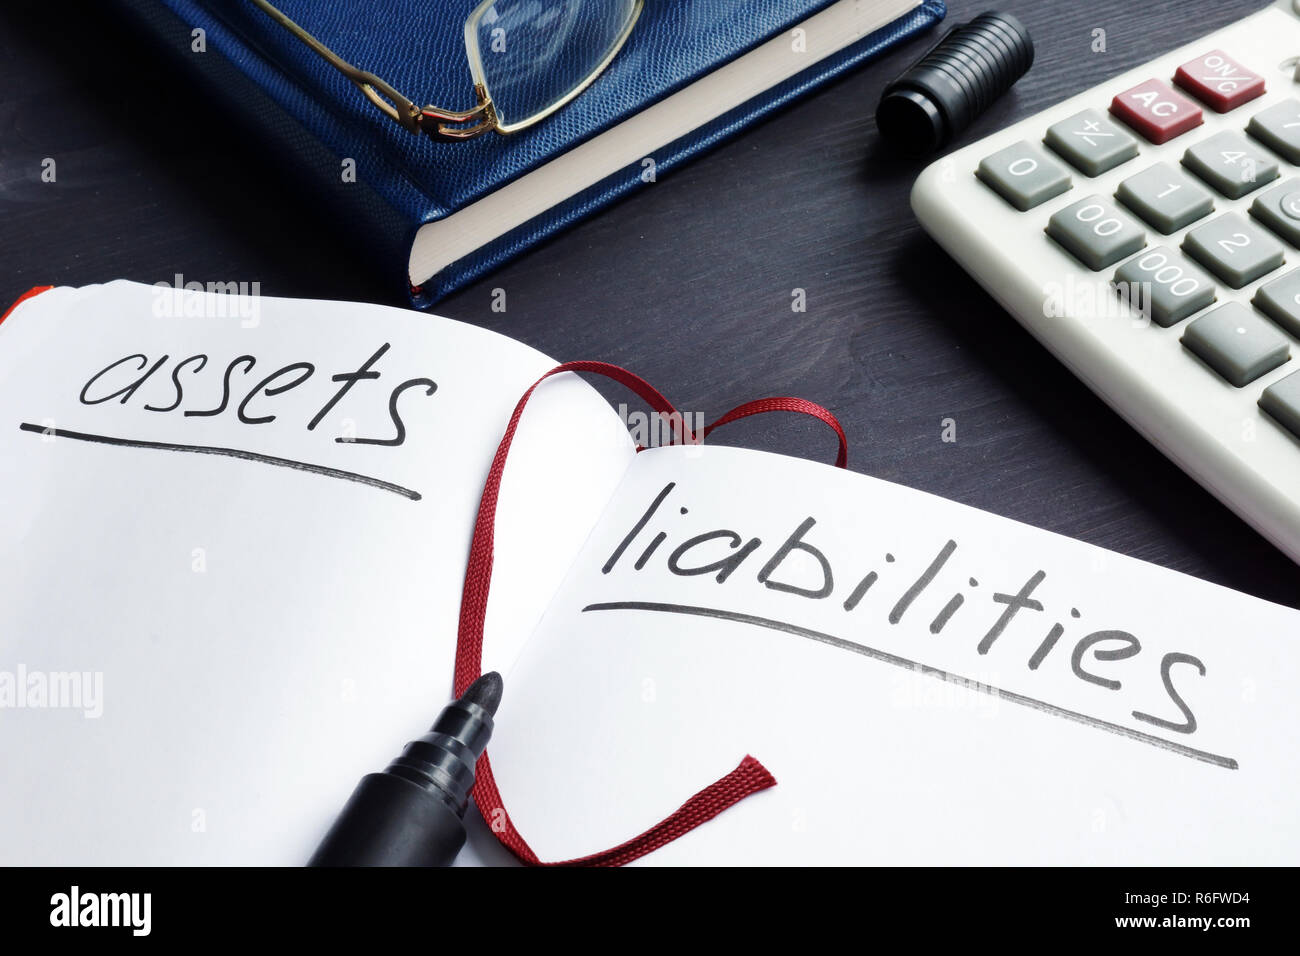 List of assets vs liabilities in the note pad. Stock Photo